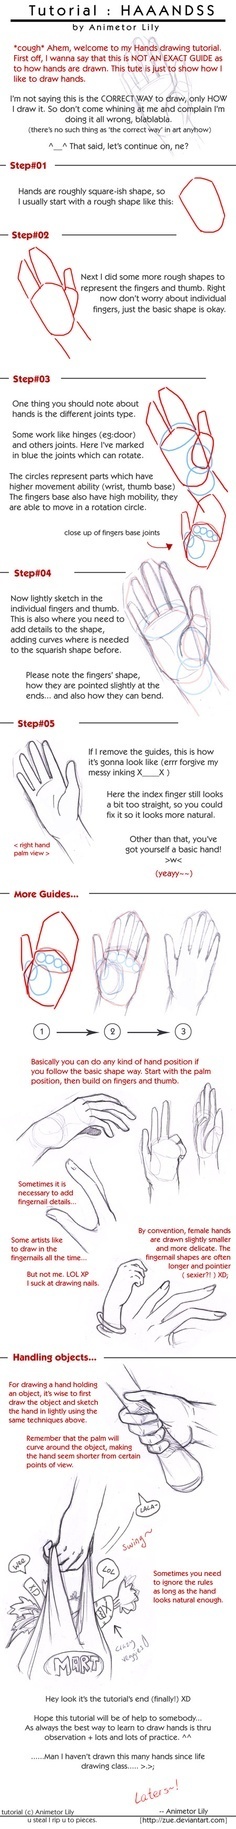 Hands Drawing Reference Guide for Artists | Drawing References and Resources | Scoop.it